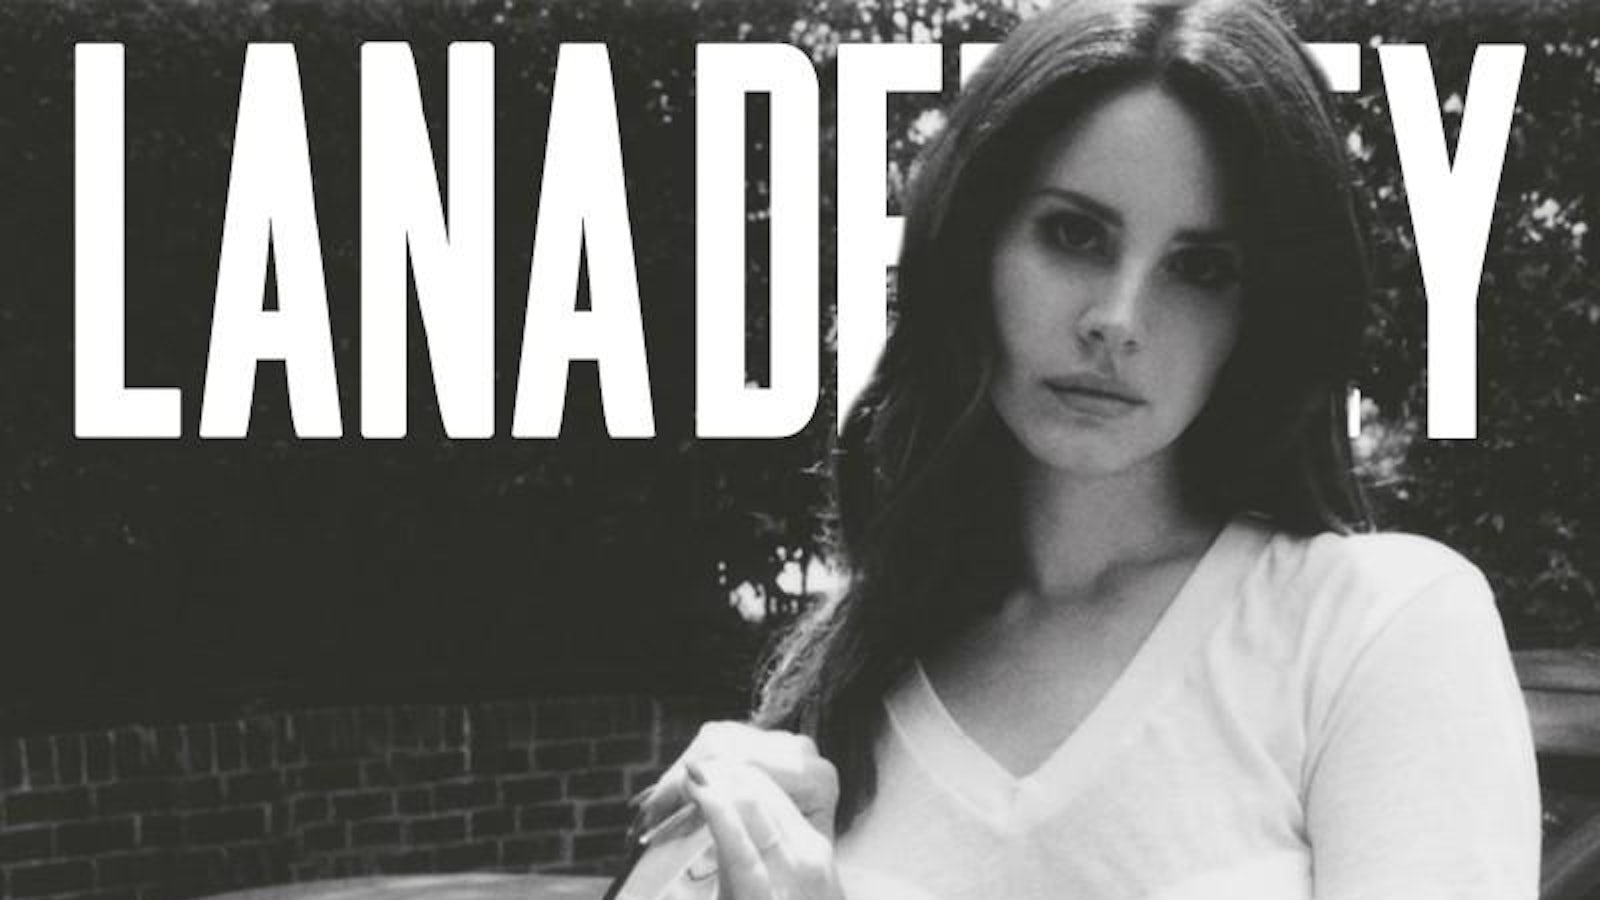 The new single from Lana Del Rey is called 